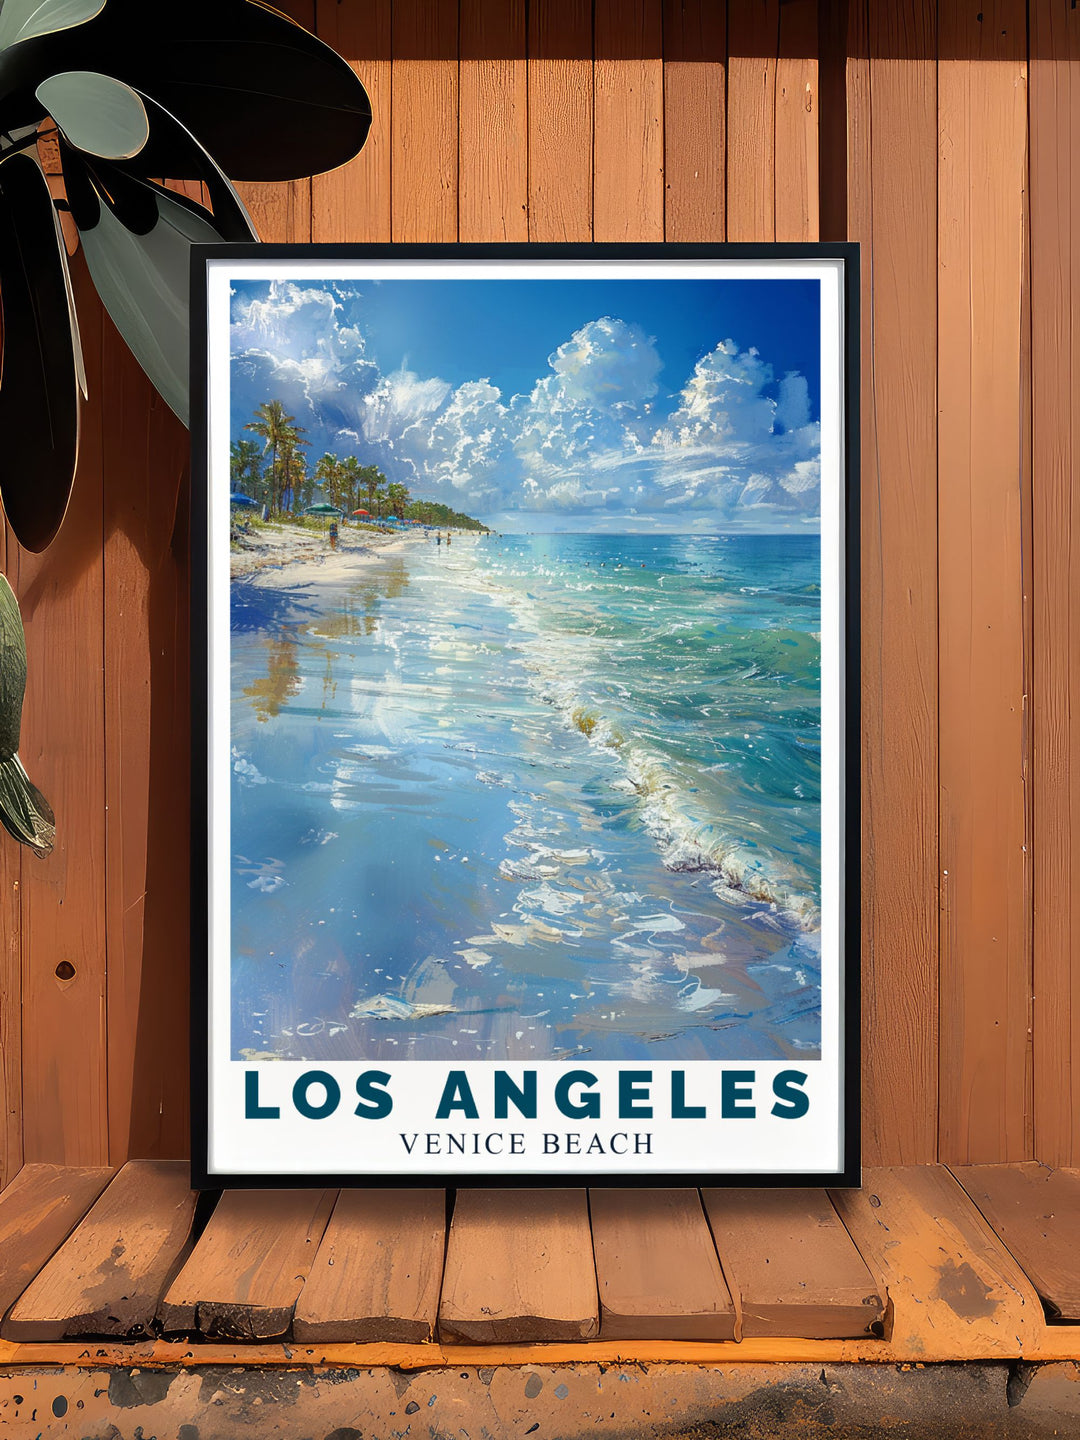 Showcasing both Los Angeles and Venice Beach, this travel poster captures the unique blend of city excitement and beach relaxation, perfect for enhancing your living space with Californias coastal elegance.